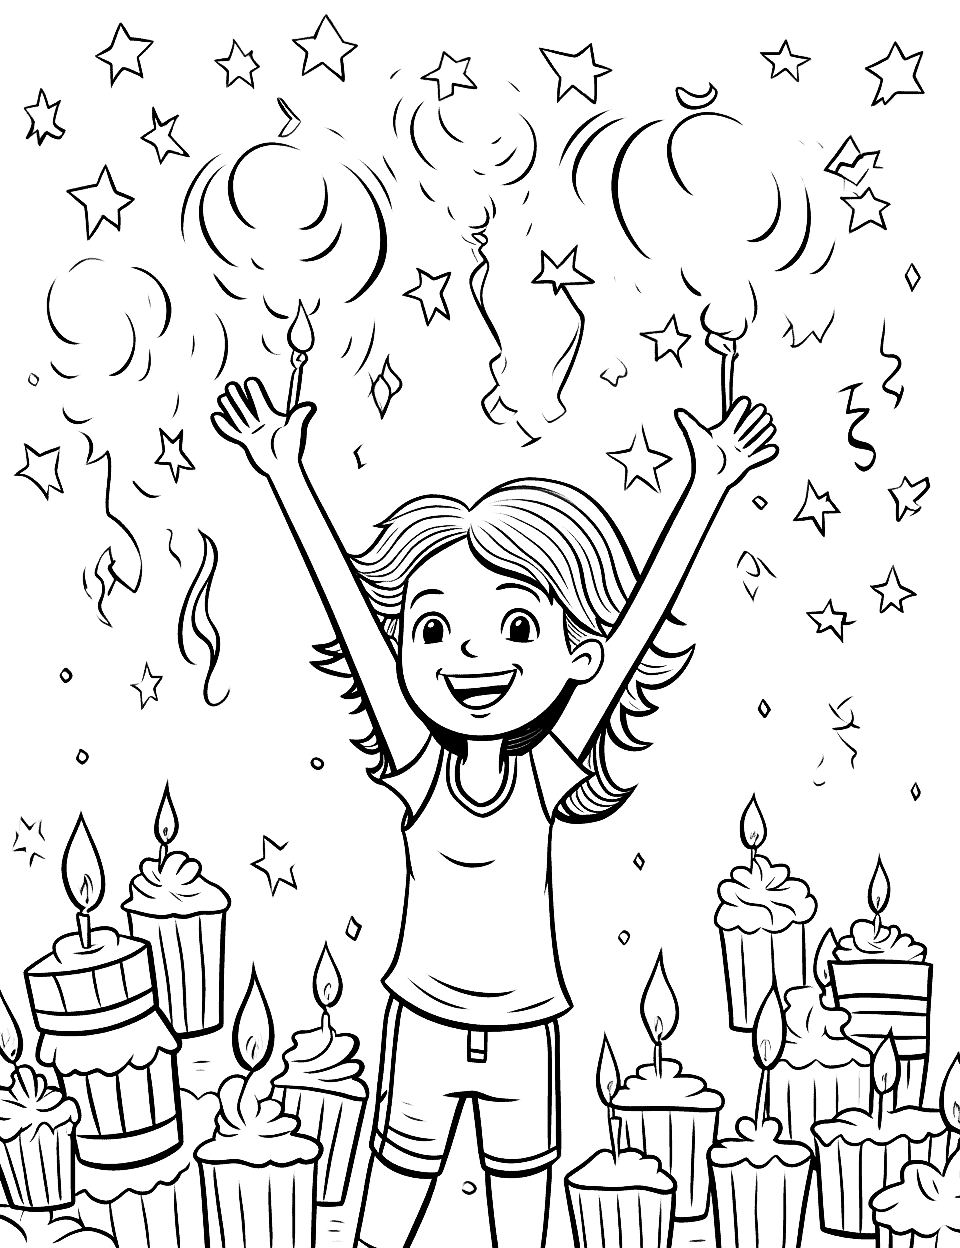 Confetti Birthday Happy Coloring Page - A girl celebrating her birthday with confetti and candles.